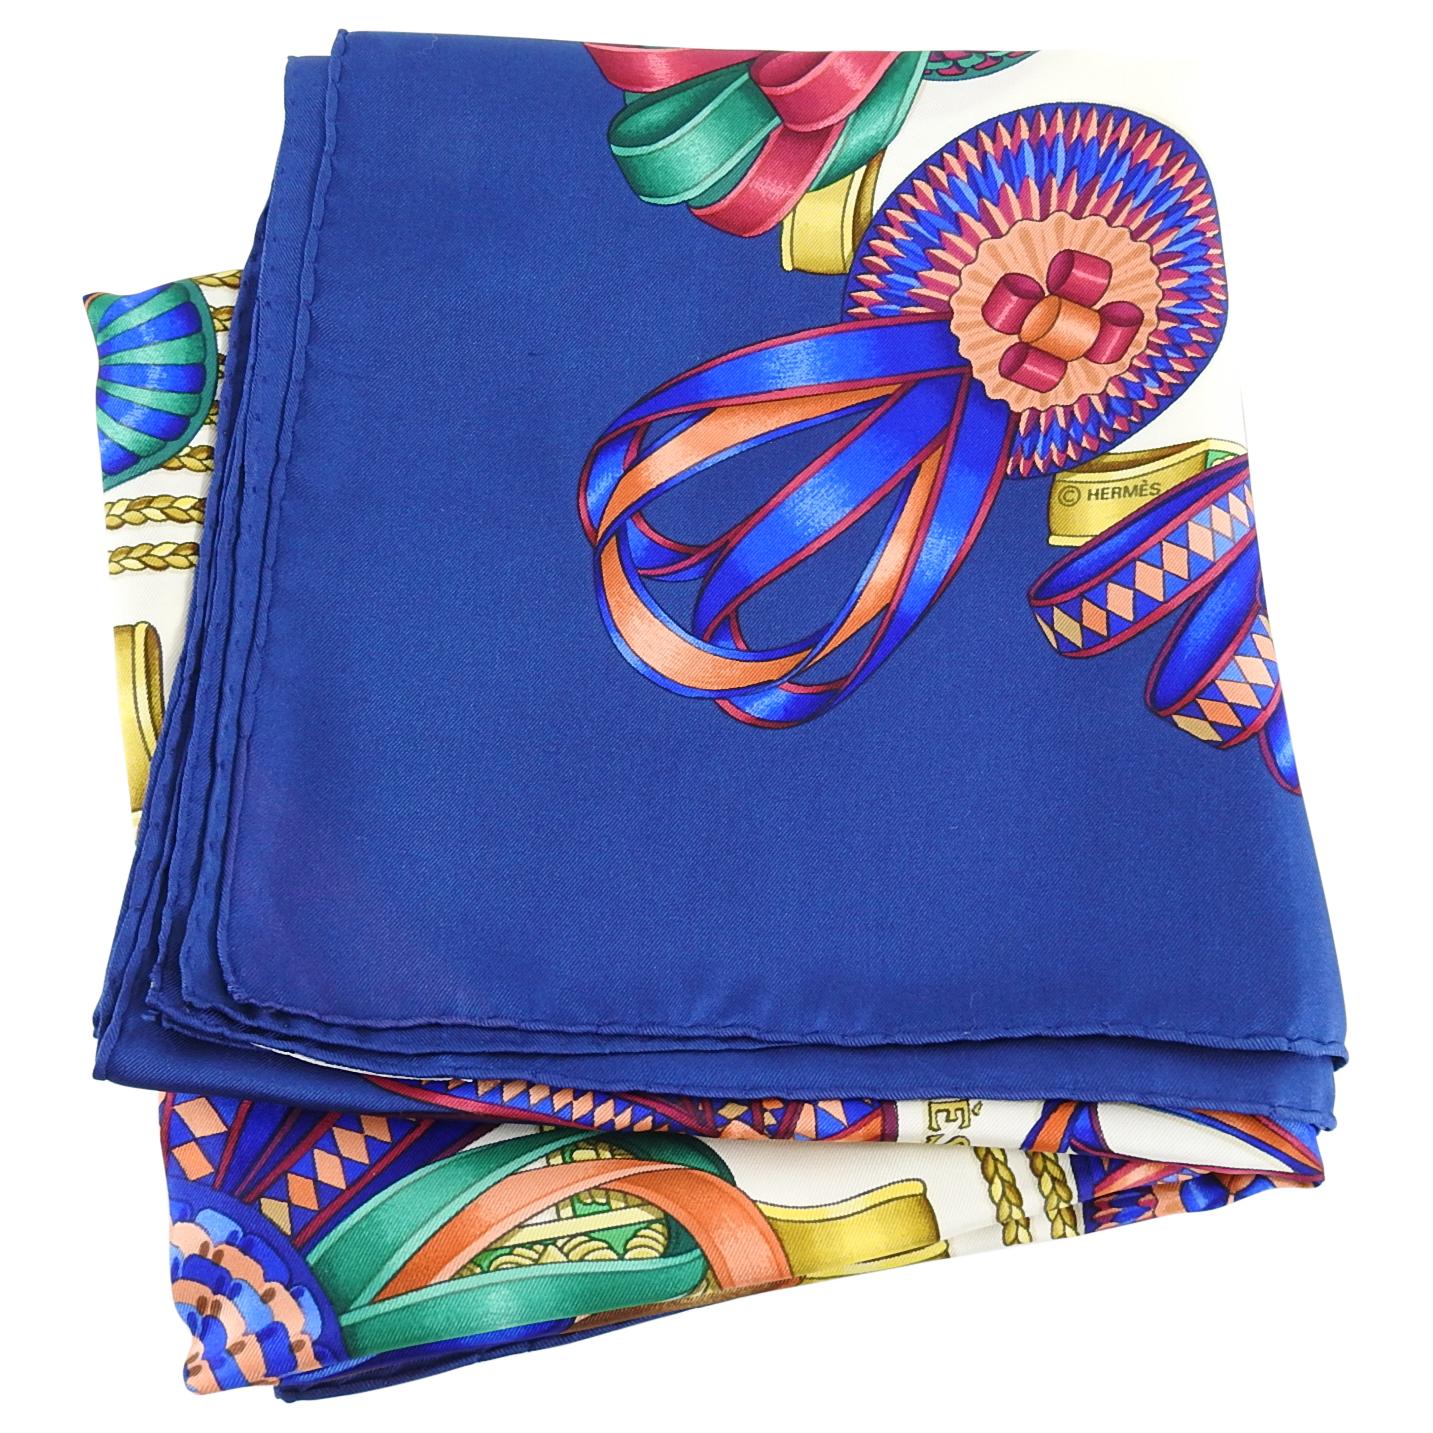 Hermes Les Rubans de Cheval Dark Blue 90cm Silk Scarf In Excellent Condition For Sale In Toronto, ON